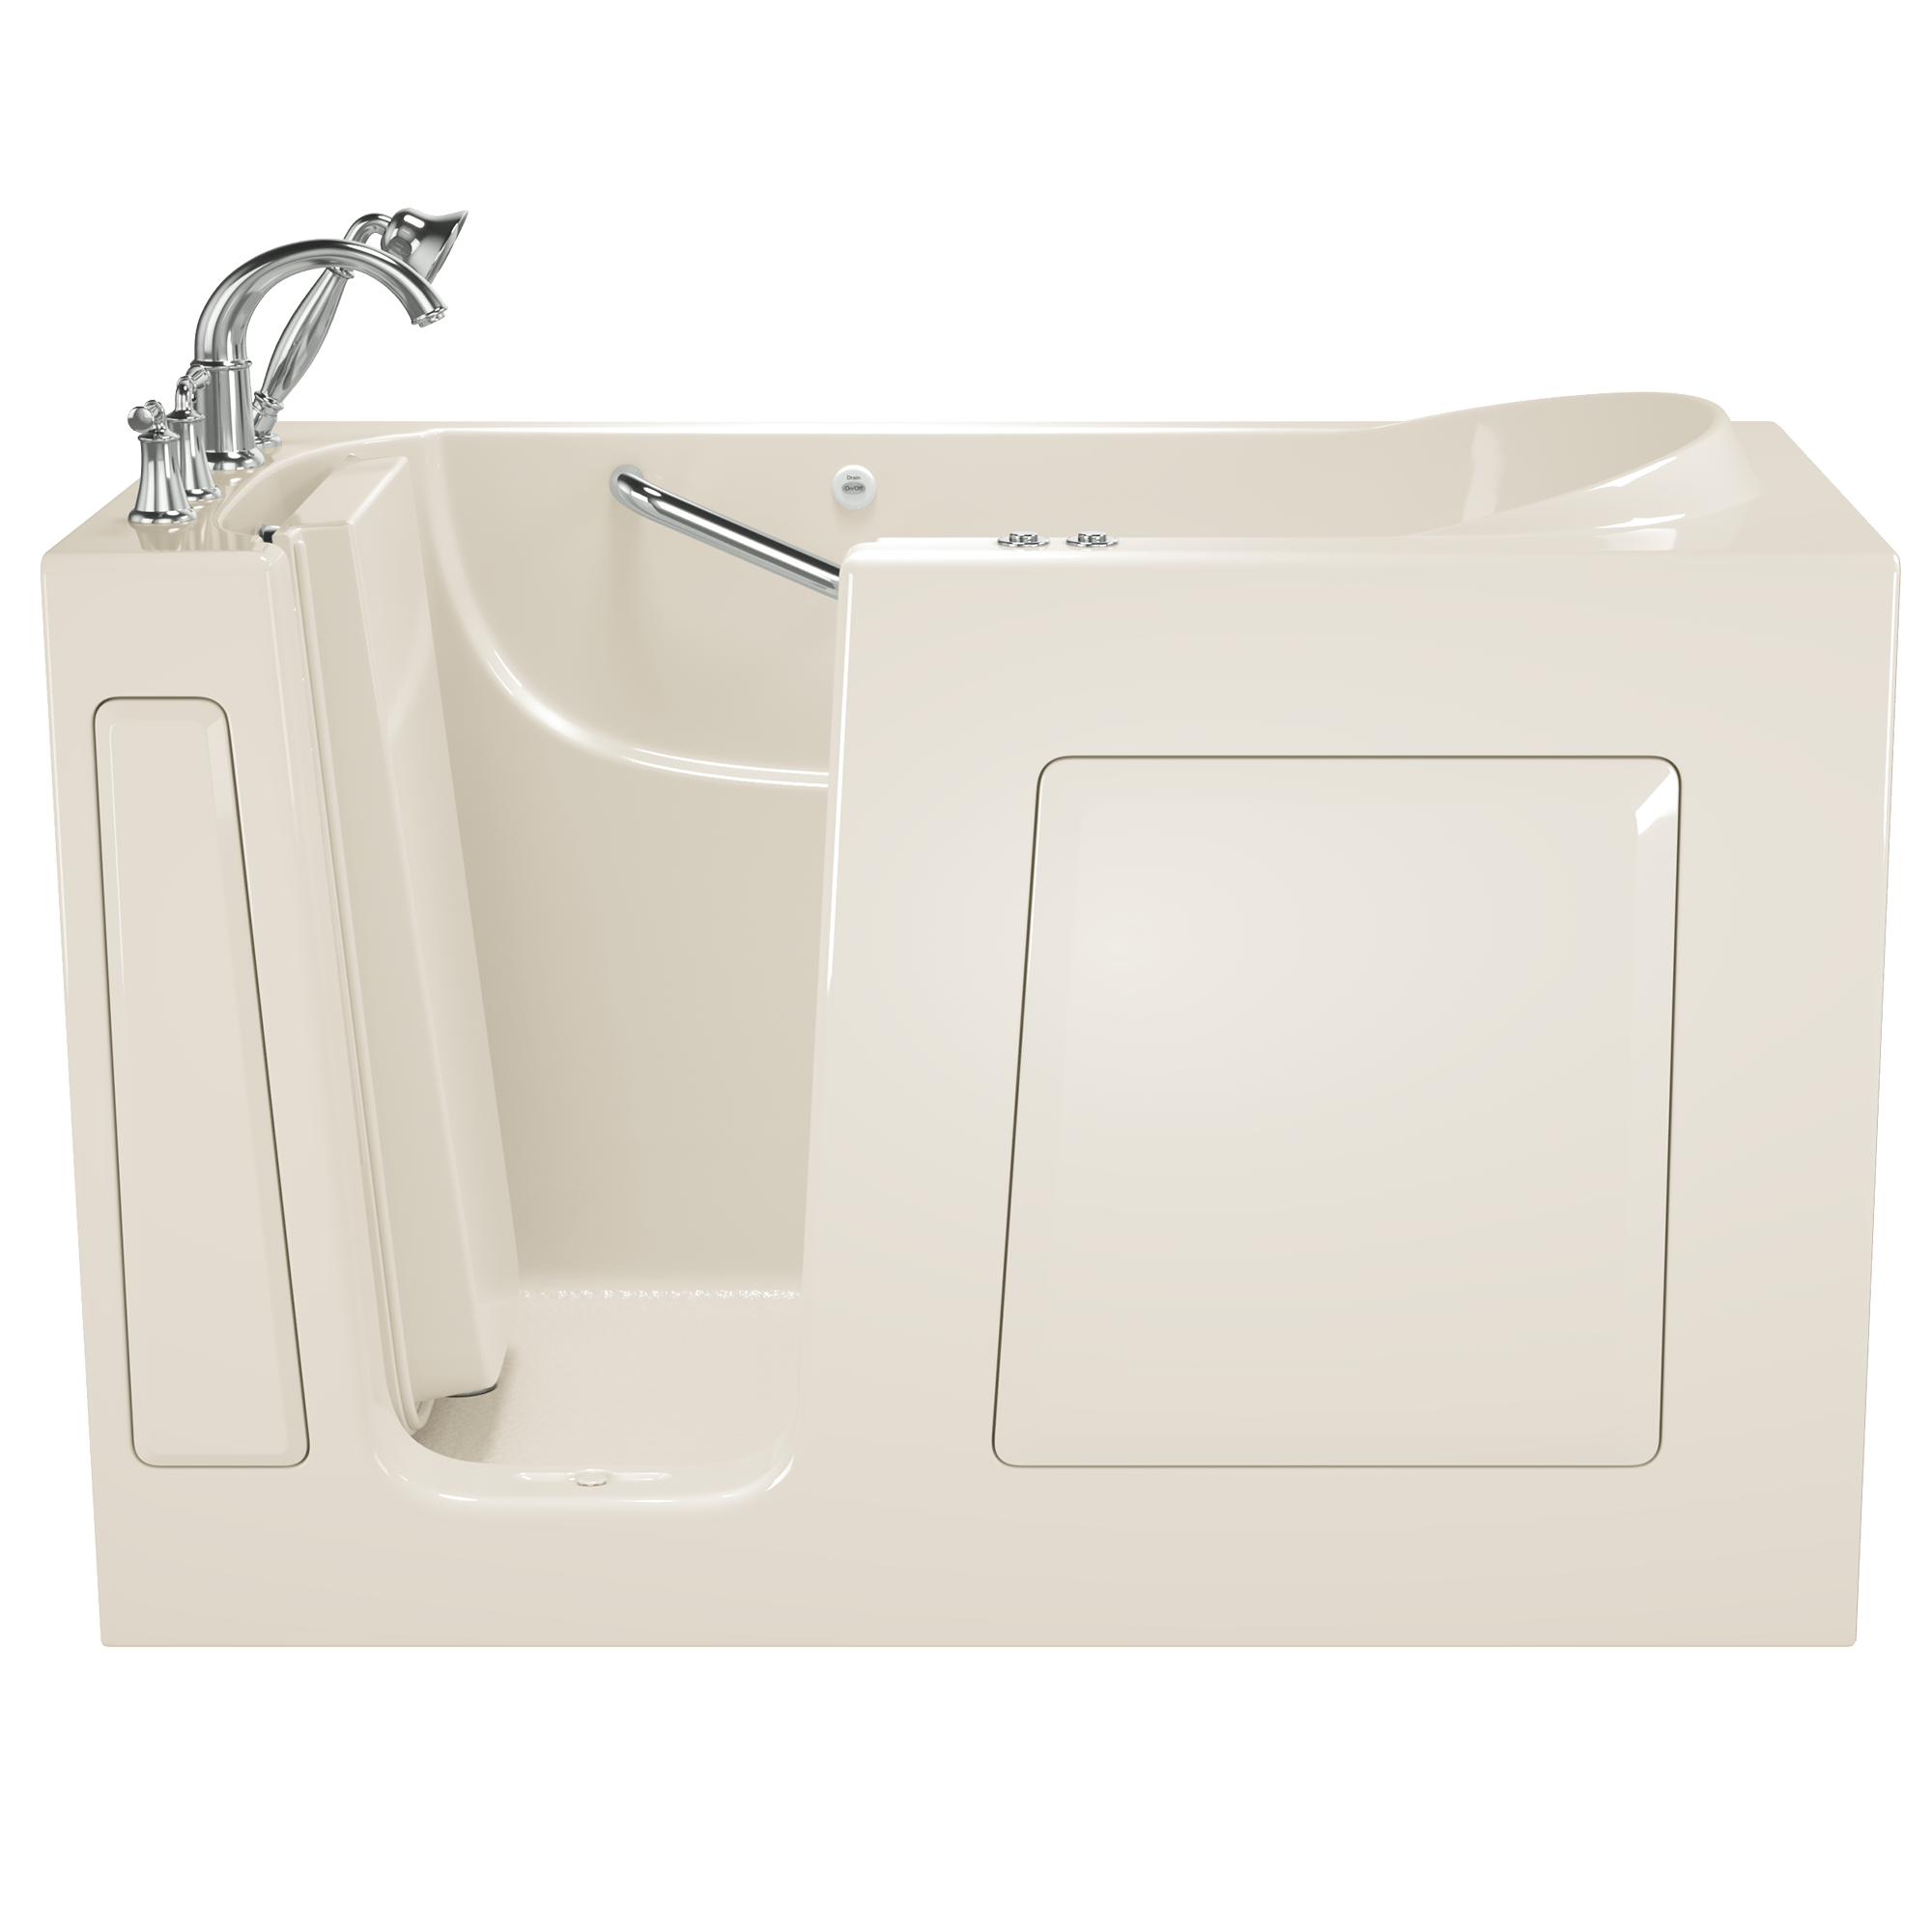 Gelcoat Value Series 60x30 Inch Walk In Bathtub with Combination Whirlpool and Air Spa System   Left Hand Door and Drain WIB LINEN